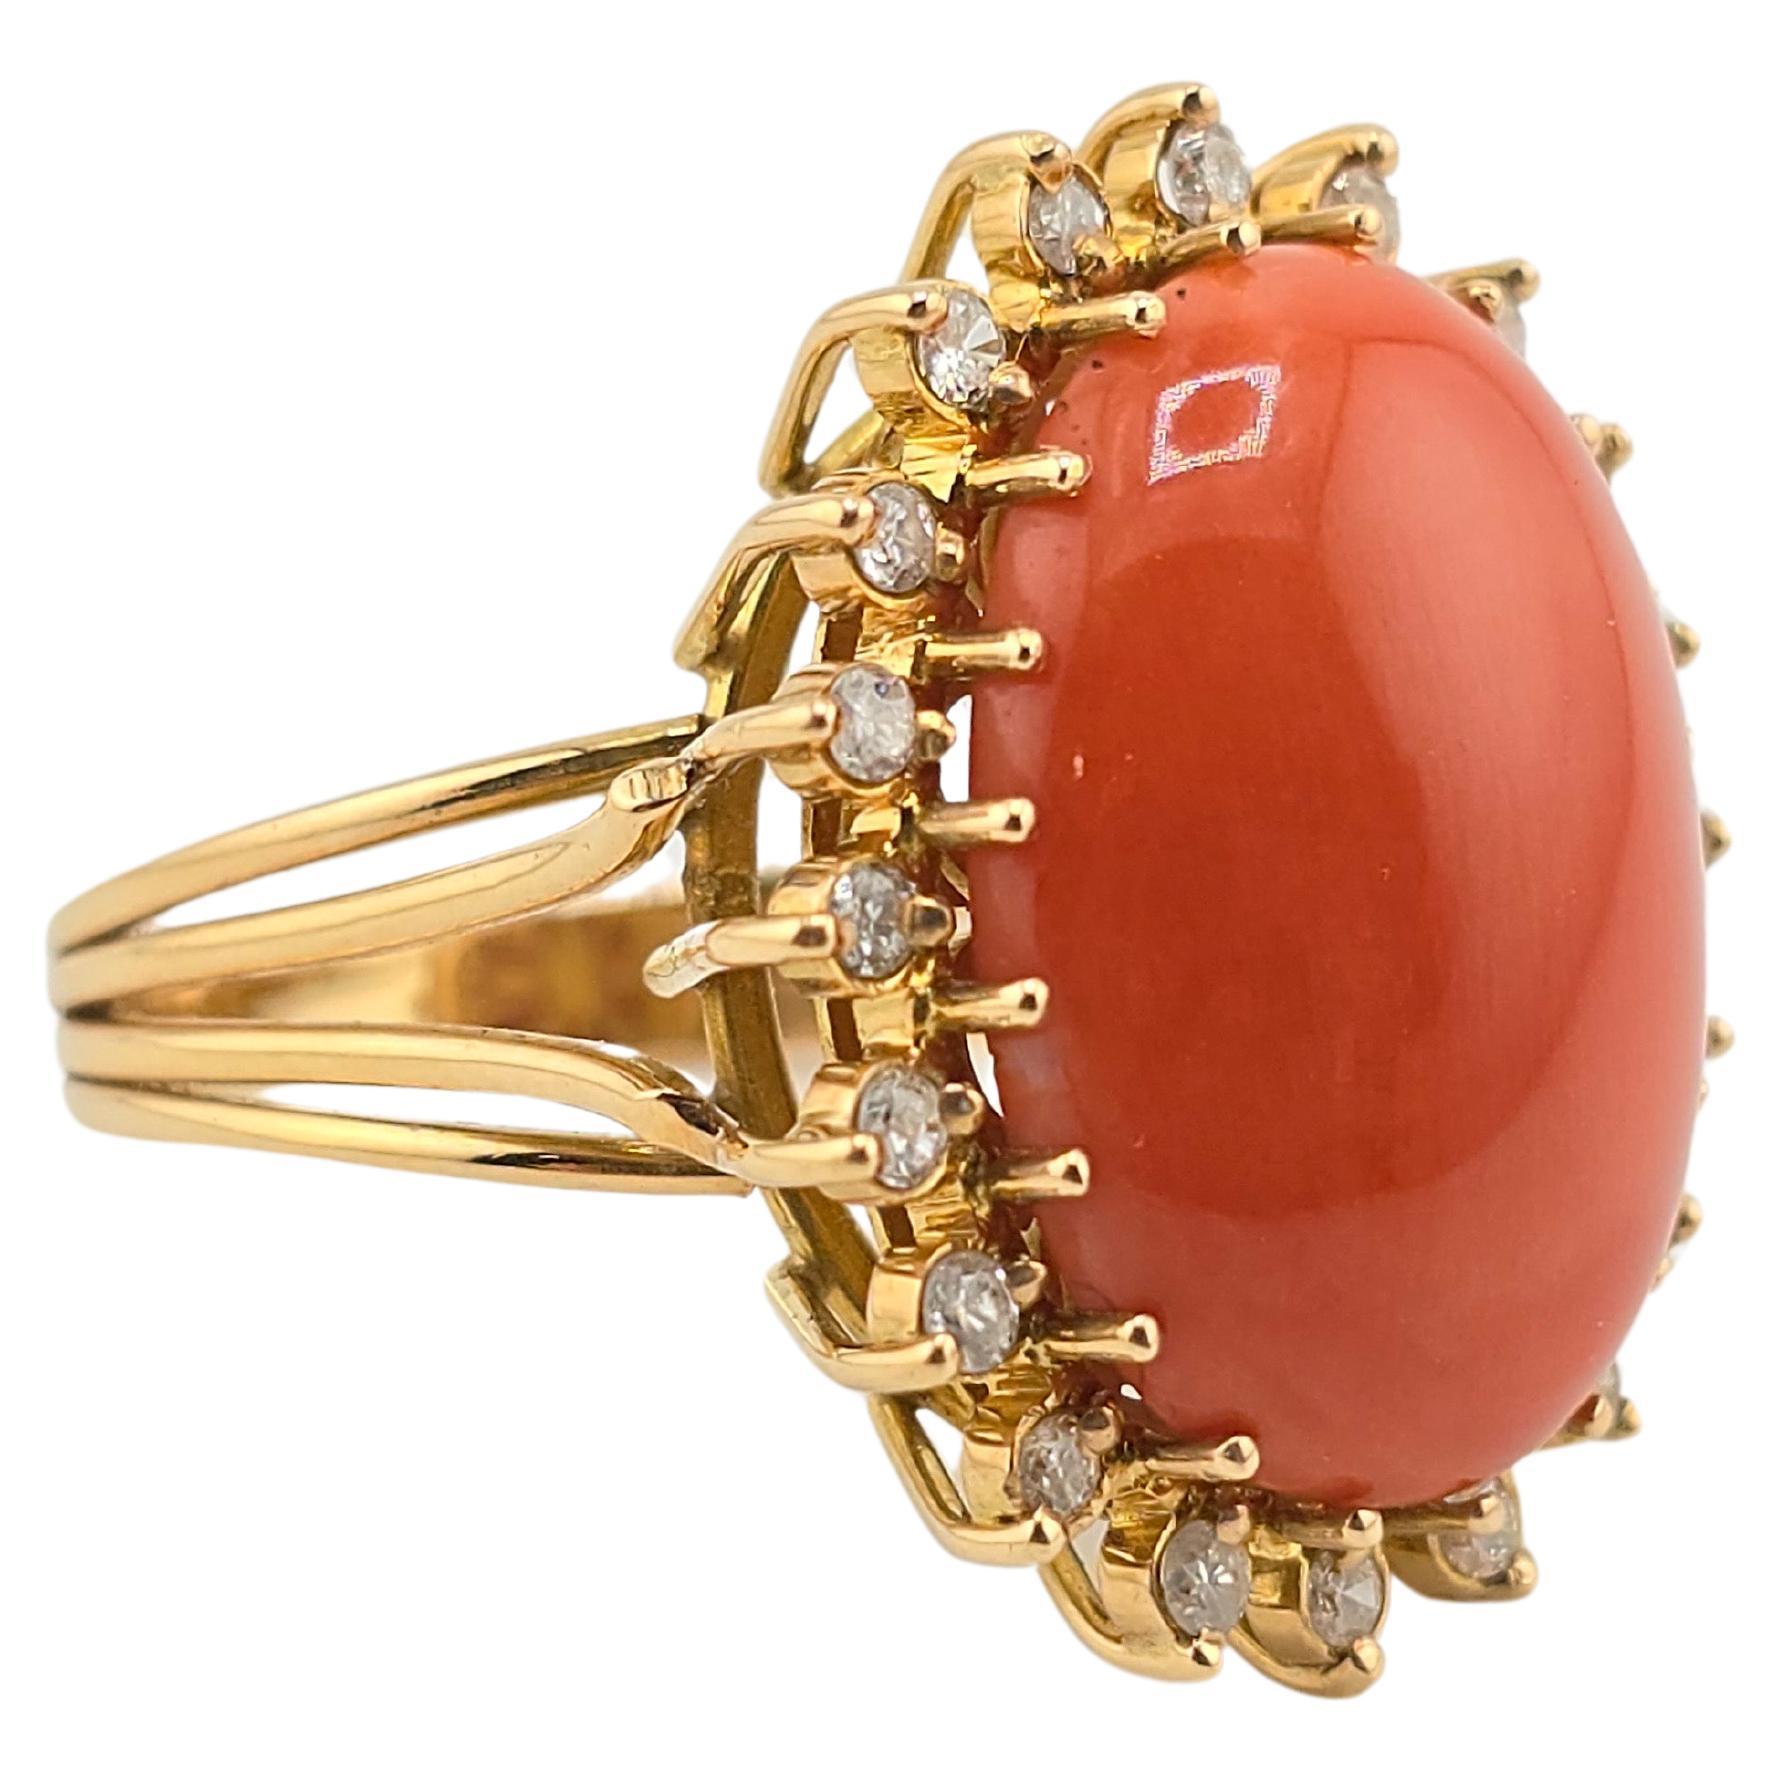 Marvelous Italian Momo Coral 14K Yellow Gold Ring Surrounded With Diamonds  For Sale